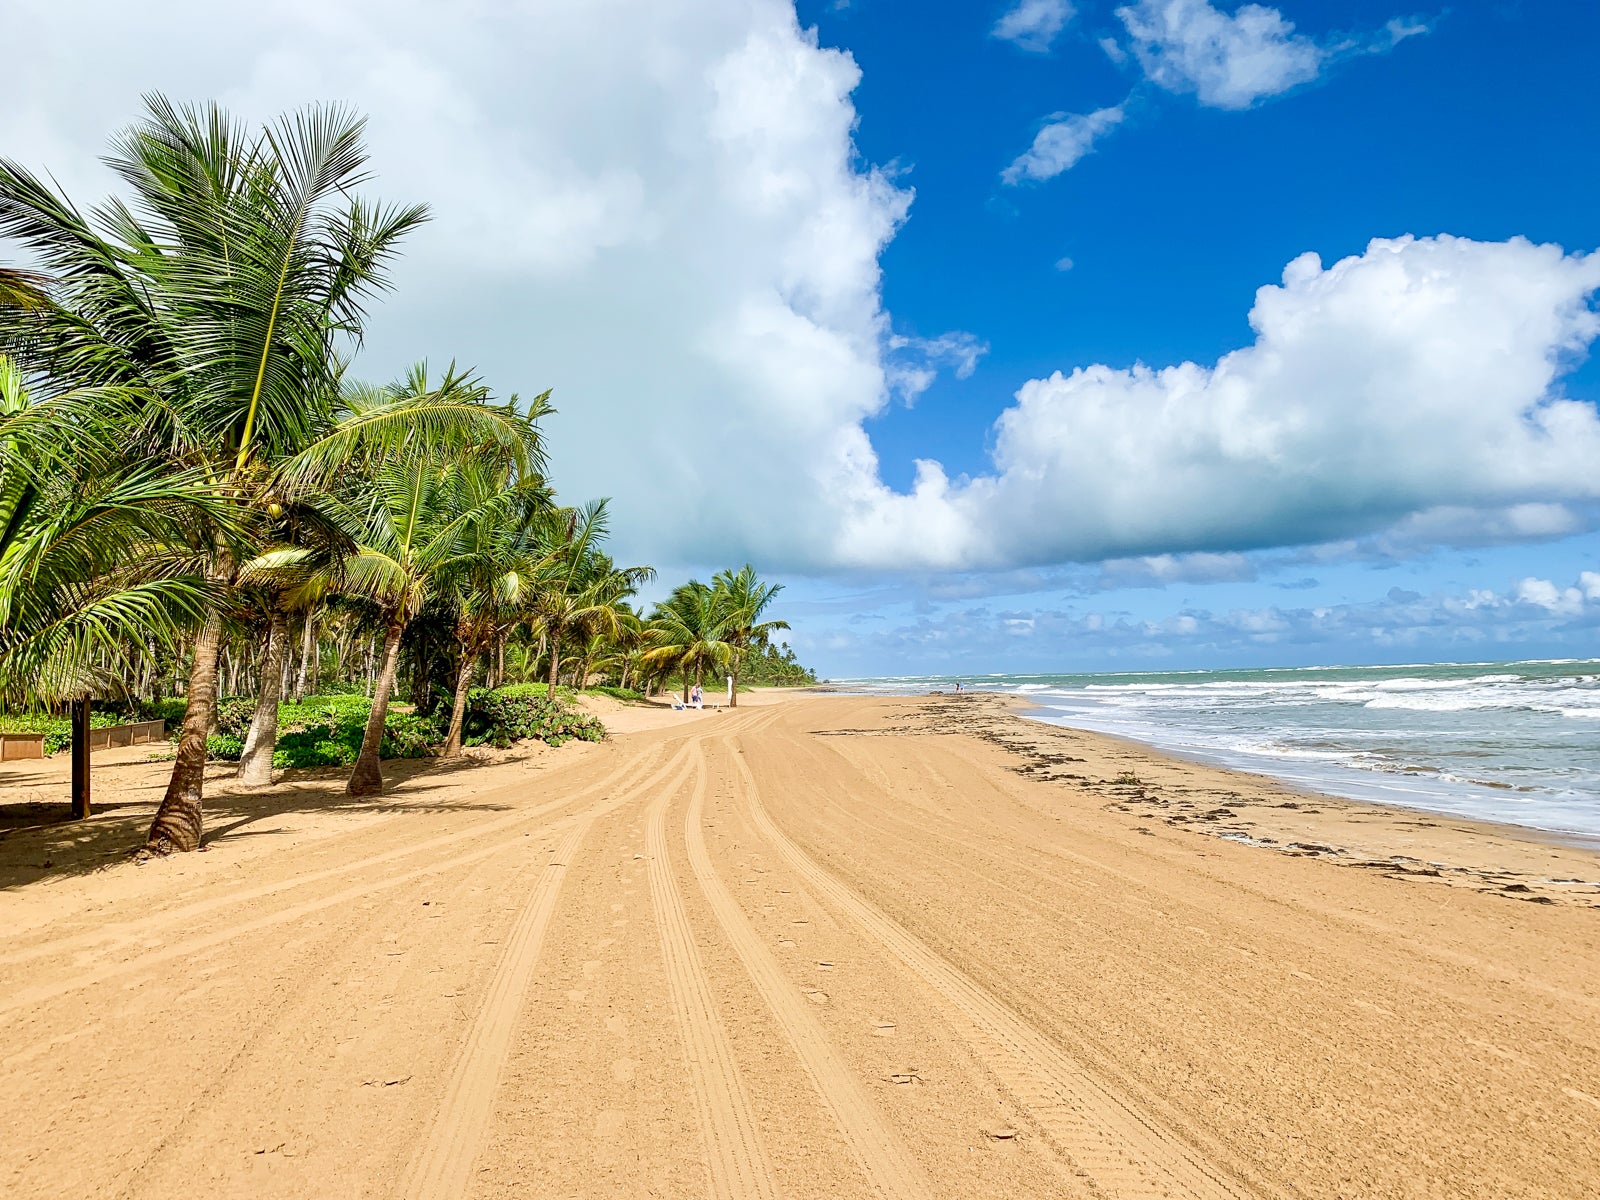 Take a one-way cruise to Puerto Rico